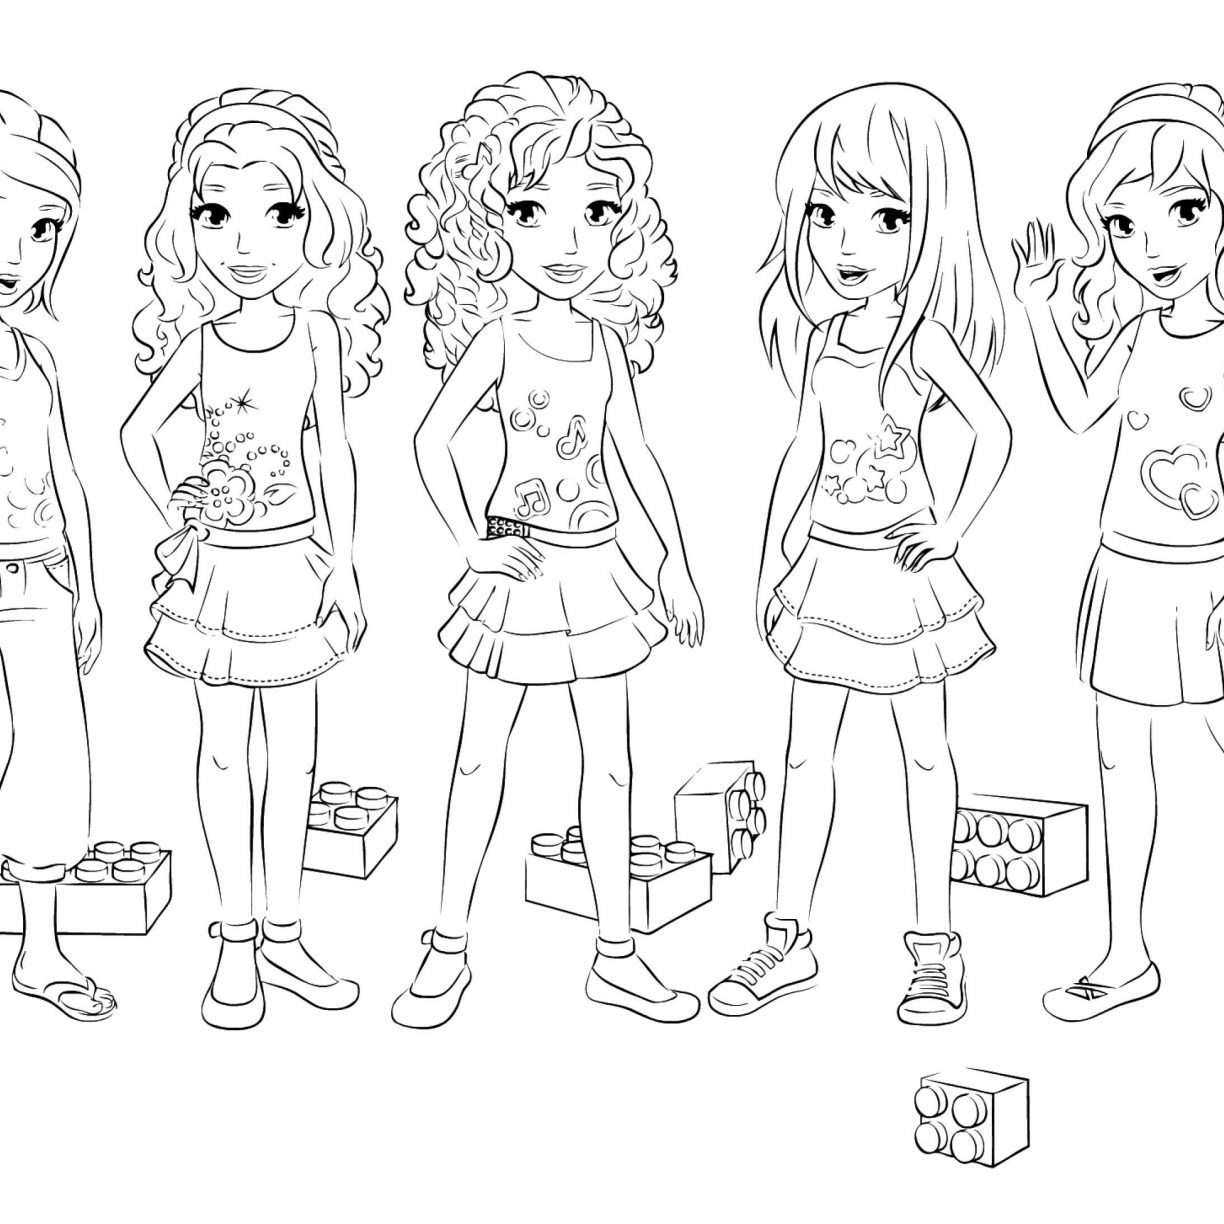 Lego Friends Coloring Pages At Getcolorings.com | Free Printable